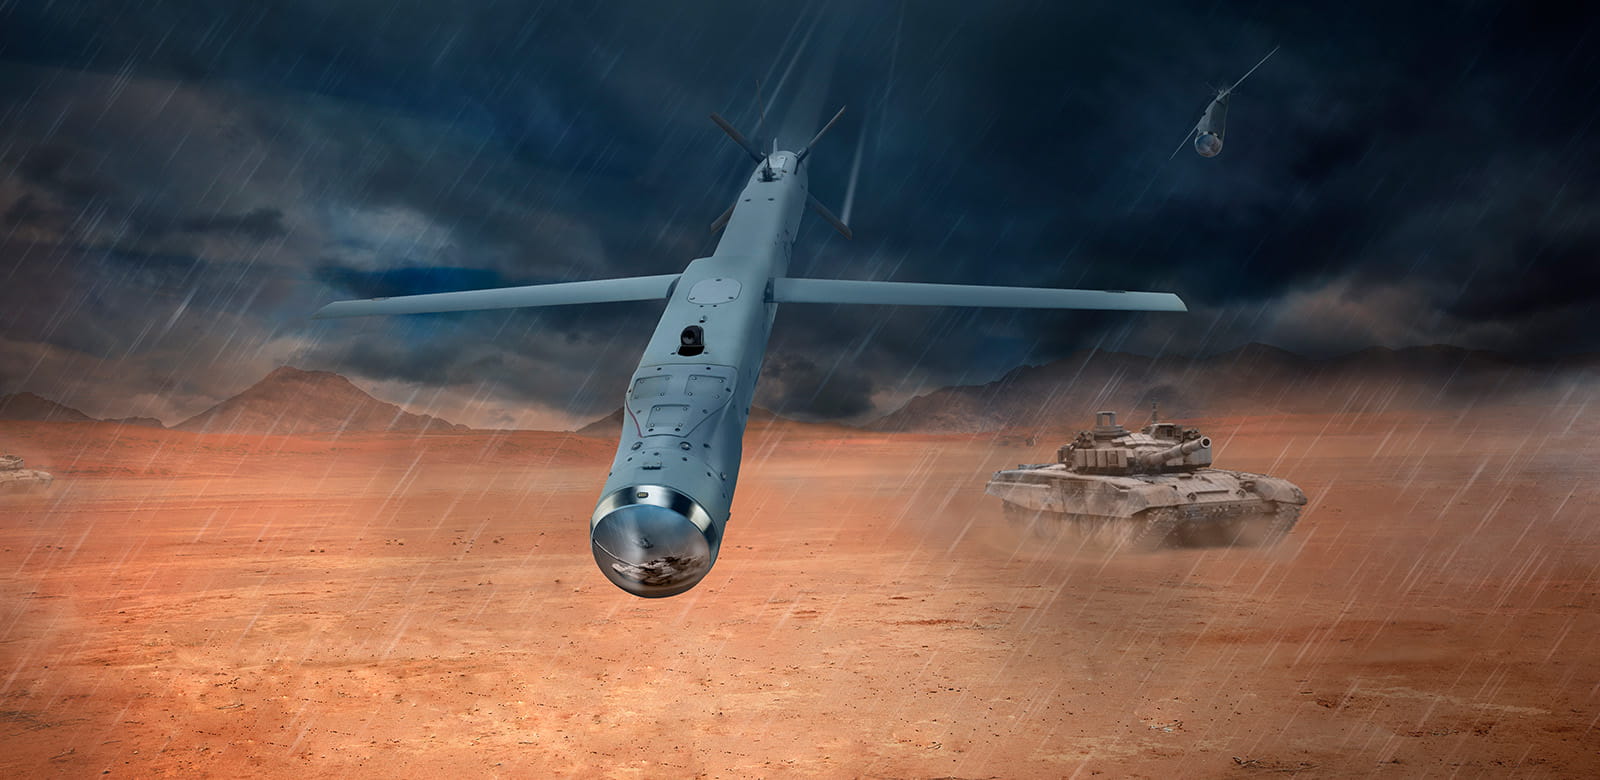 Raytheon Technologies' StormBreaker® smart weapon is a guided, gliding precision munition with a tri-mode seeker that allows it to track moving targets in low-visibility conditions such as darkness, poor weather and battlefield smoke and dust.